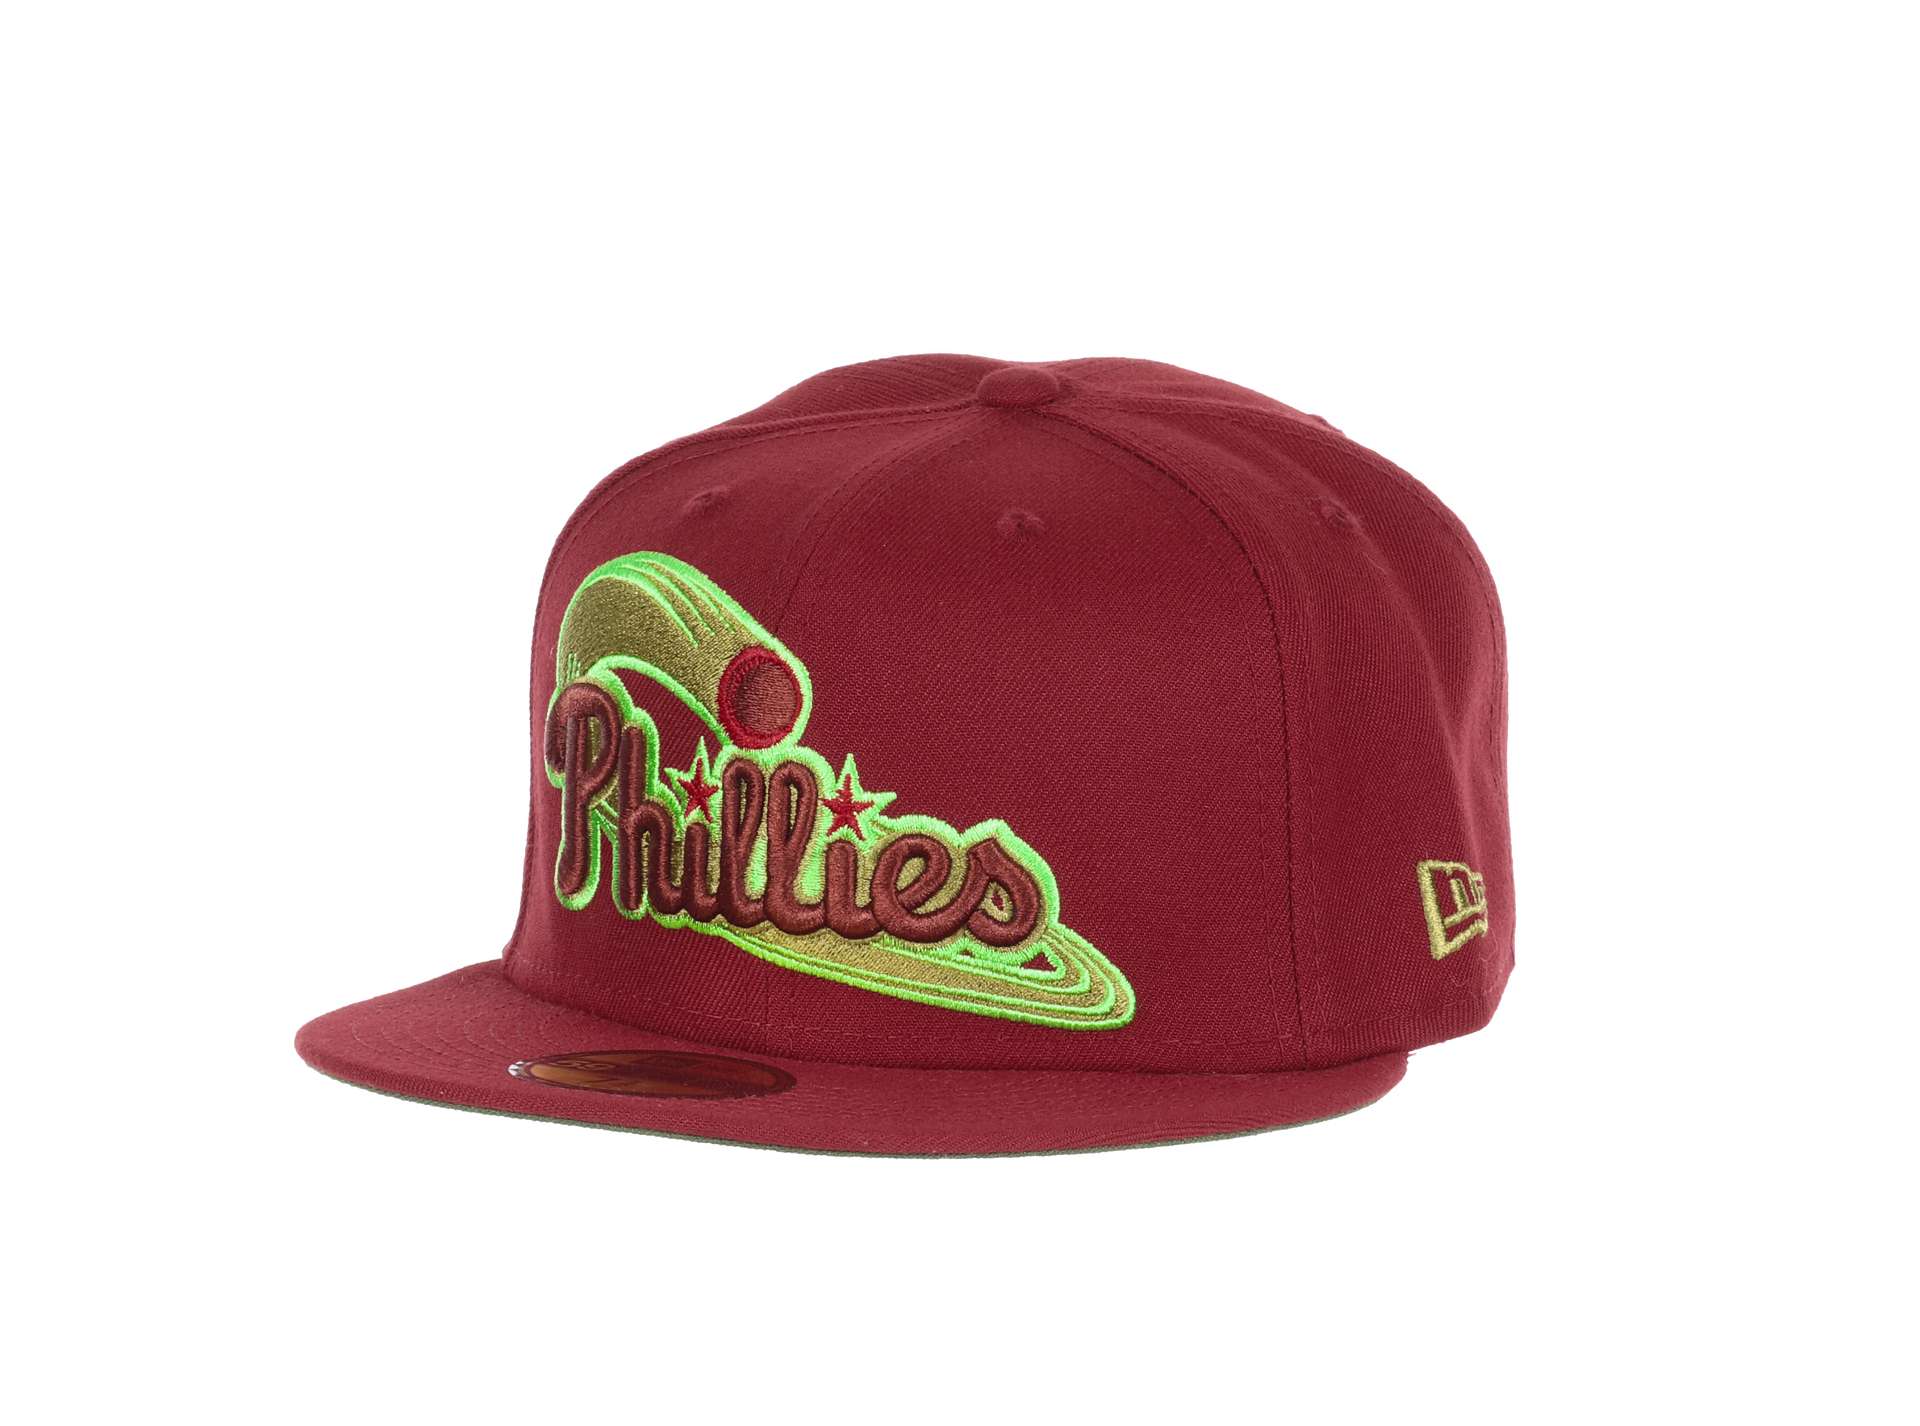 Philadelphia Phillies MLB Cooperstown All-Star Game 1996 Sidepatch Red 59Fifty Basecap New Era